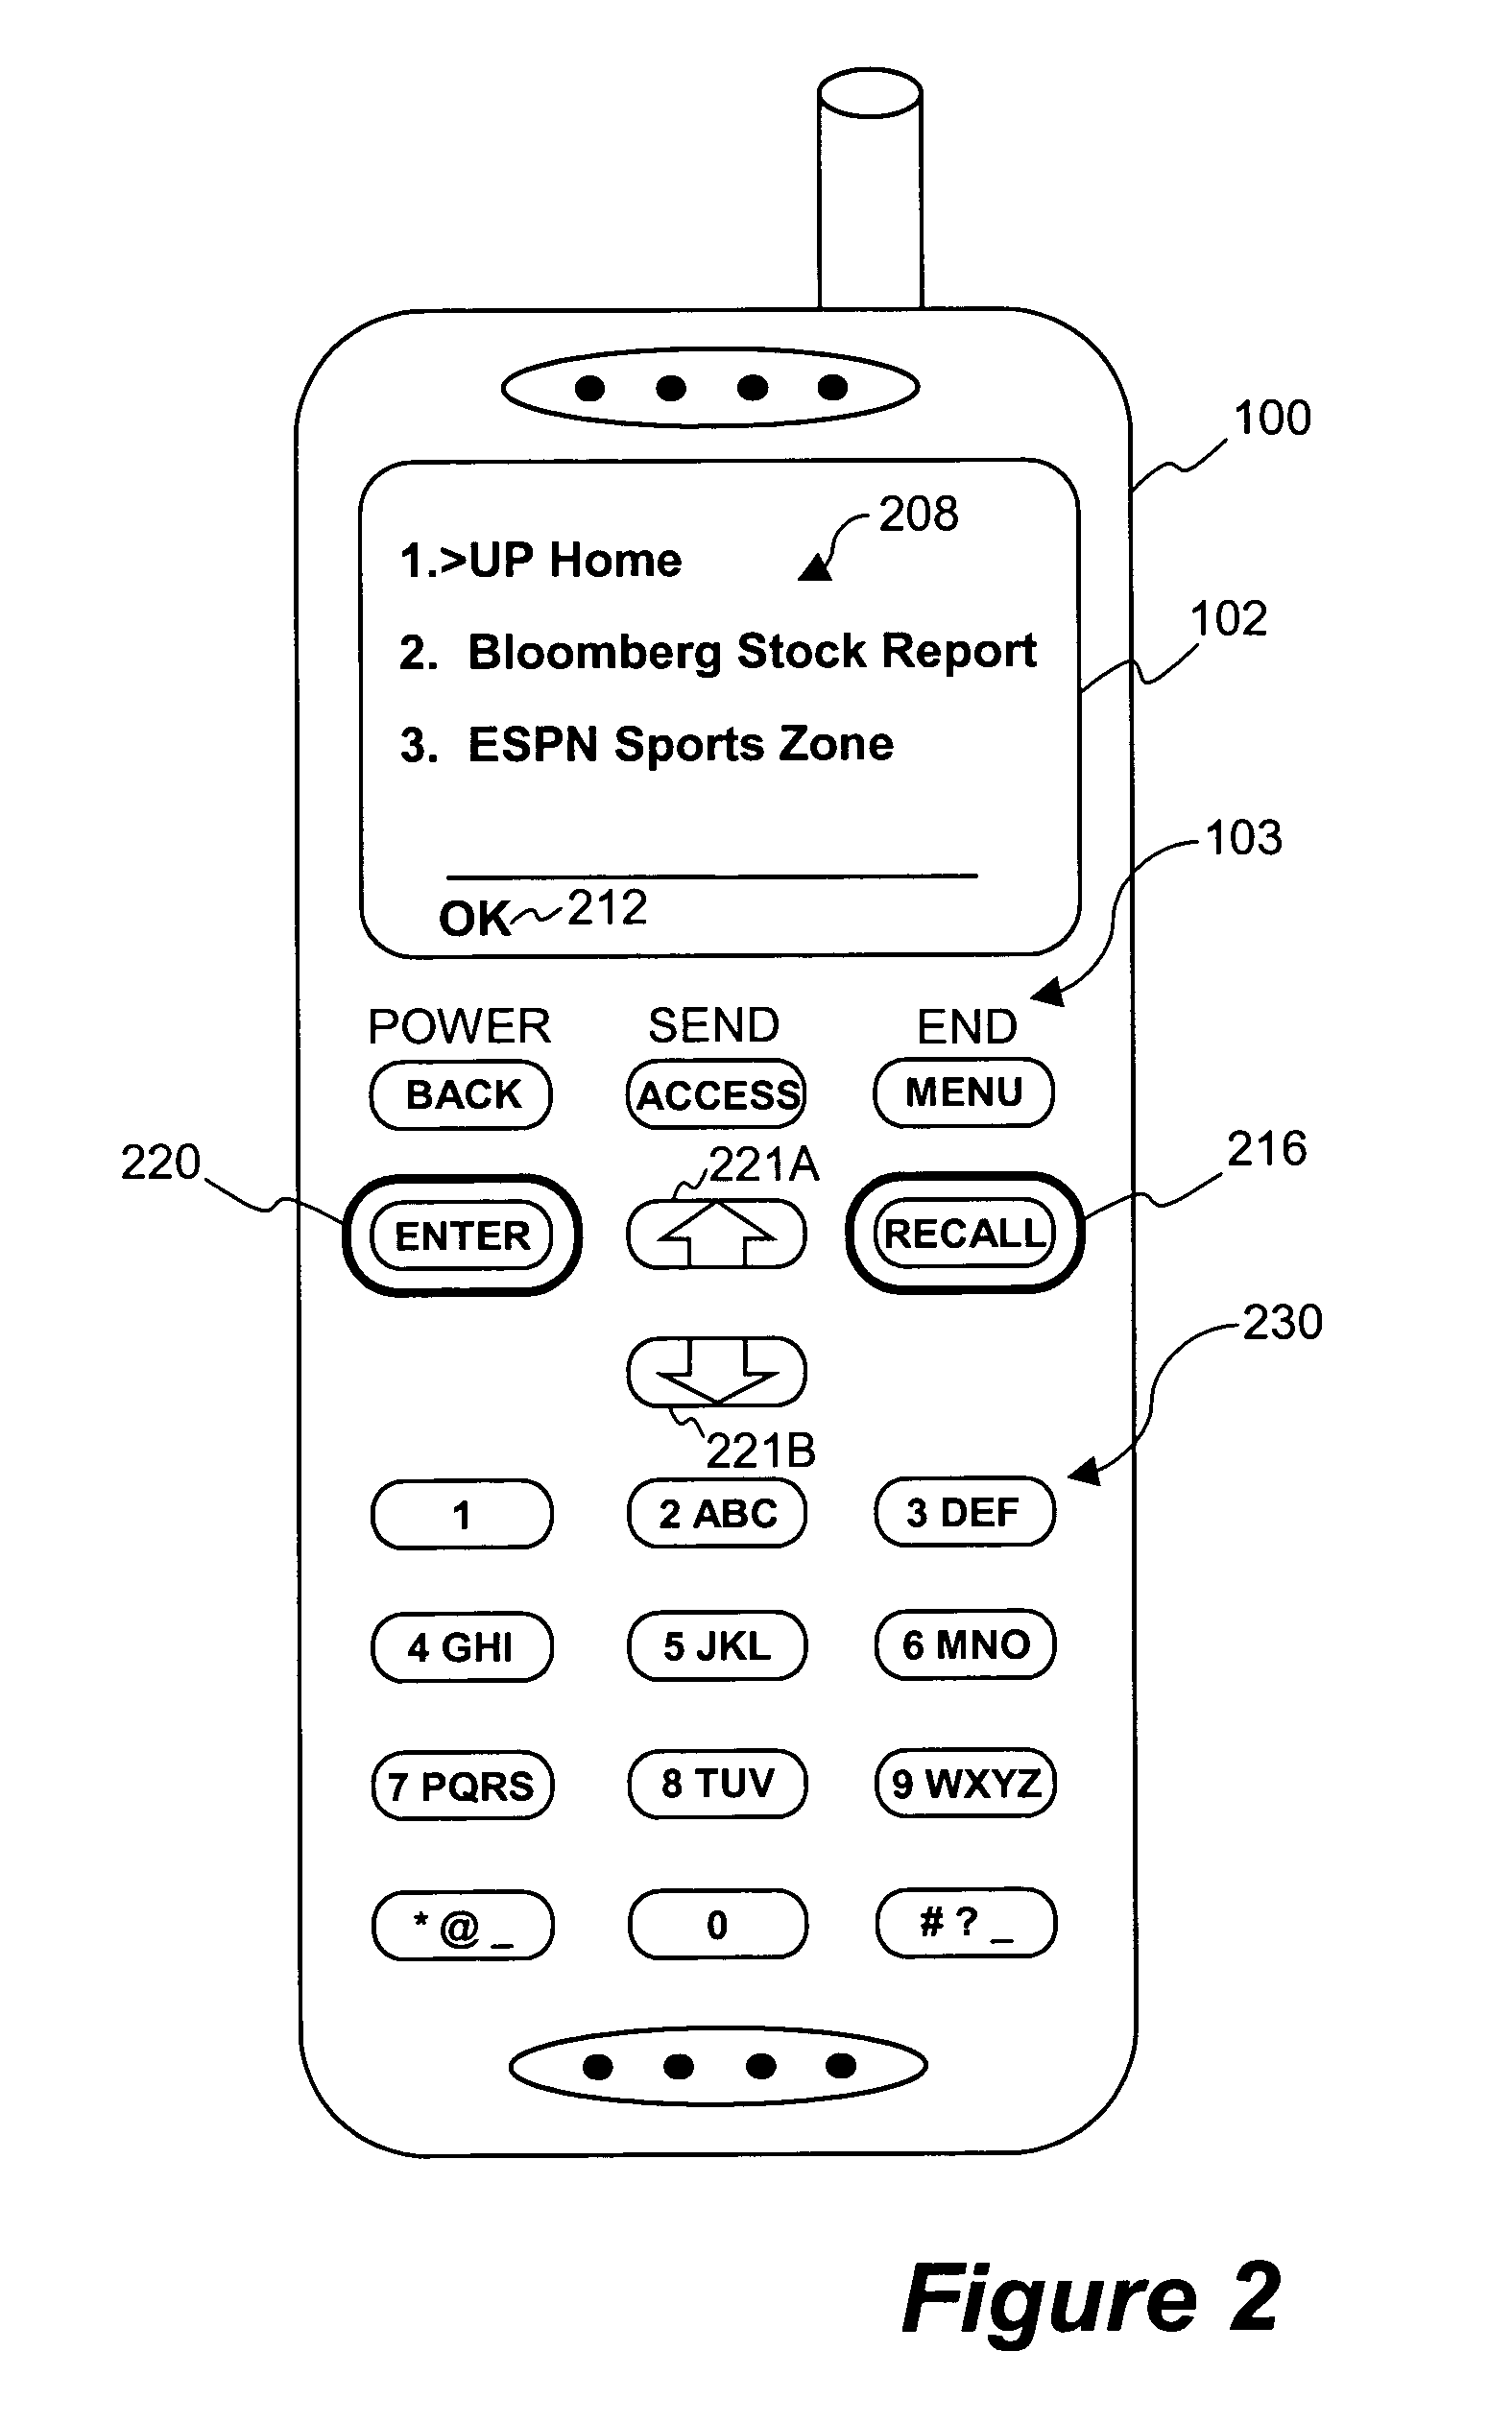 Graphical user interface features of a browser in a hand-held wireless communication device